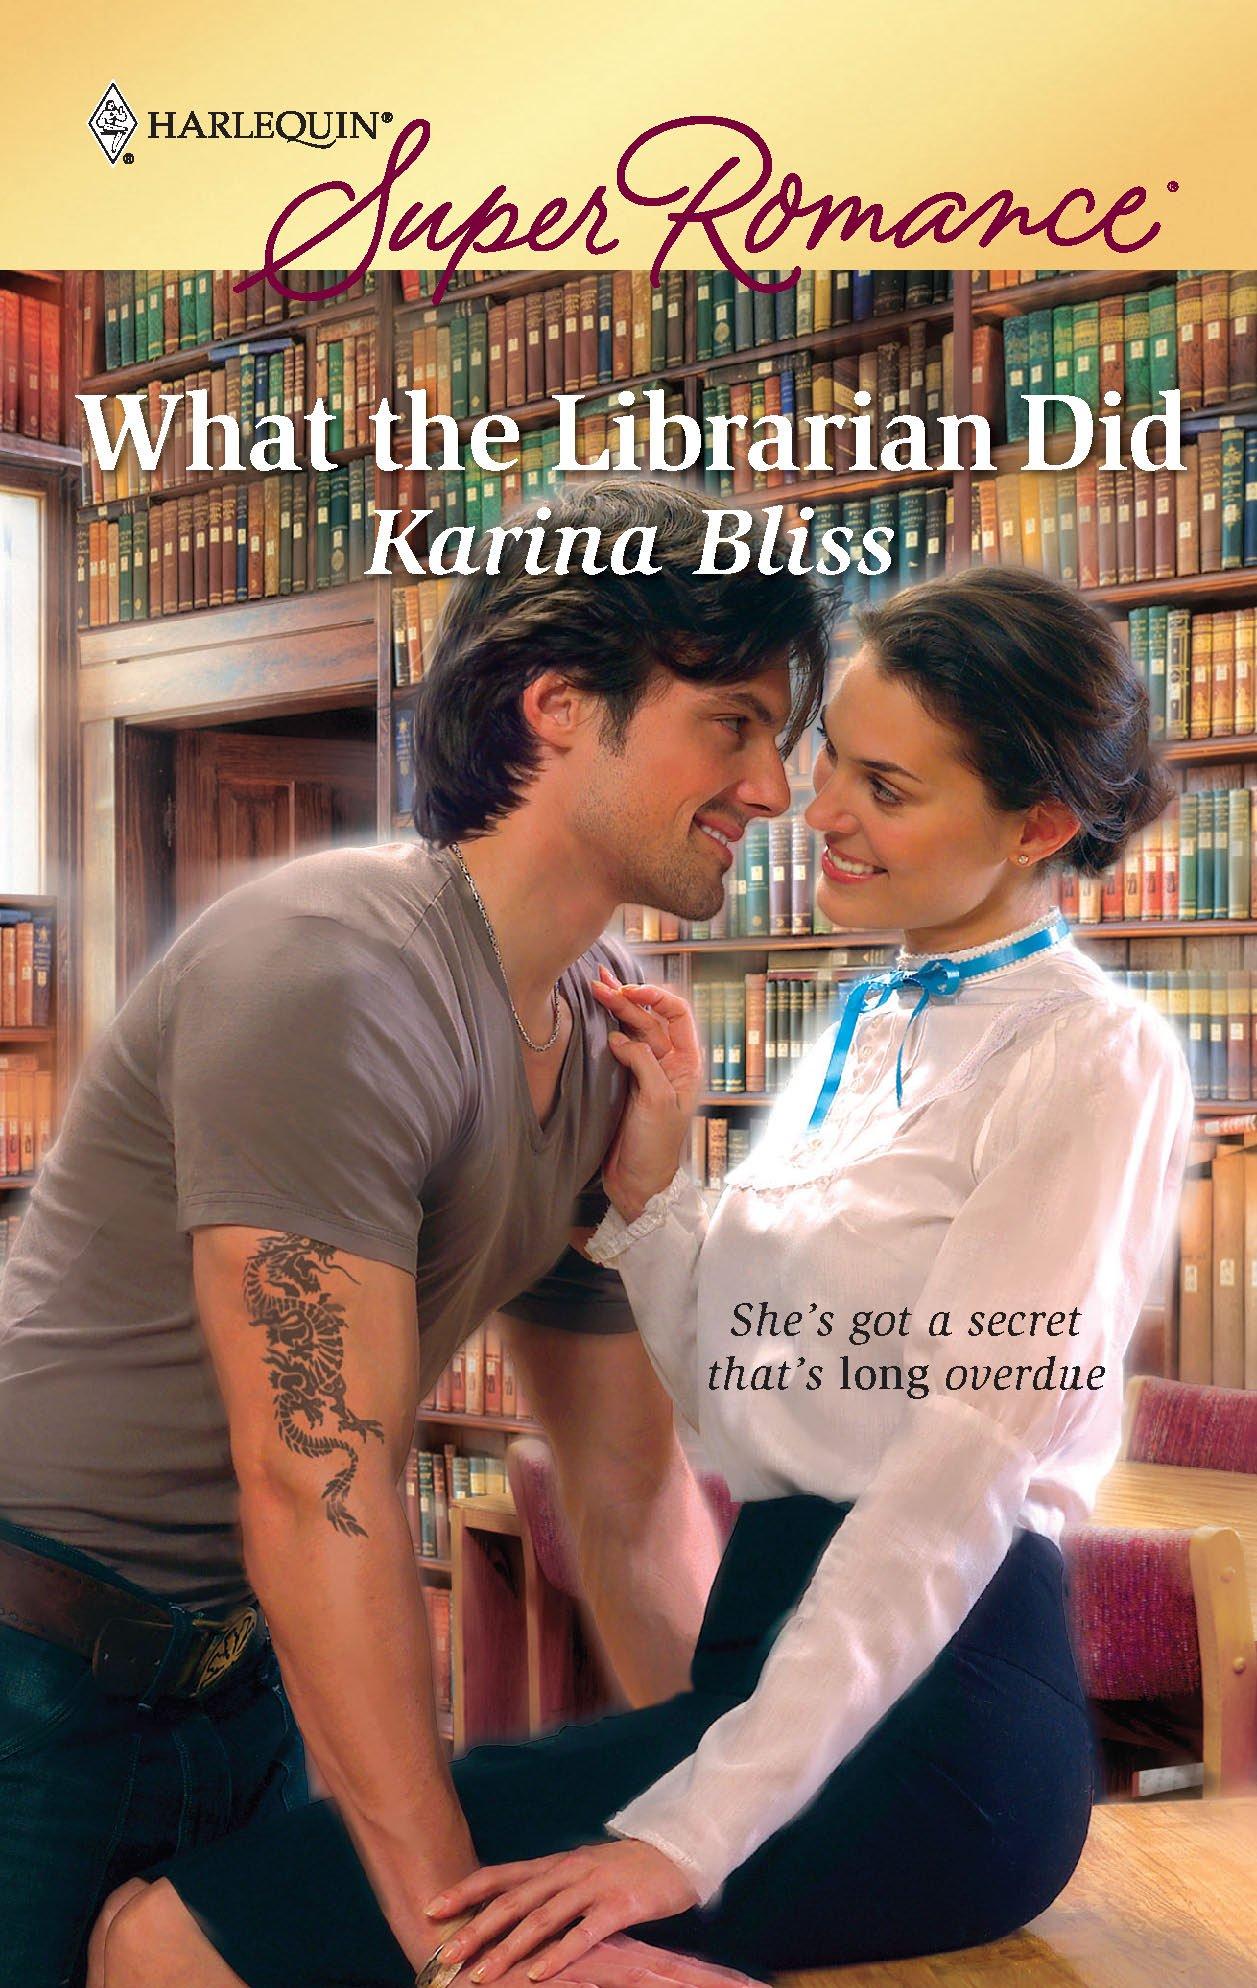 The cover of "What the Librarian Did" by Karina Bliss, which has a brunette woman in a stereotypical "old librarian" outfit sitting on a desk and smiling at a brunette man with a tattoo on his arm who is leaning in for a kiss. 